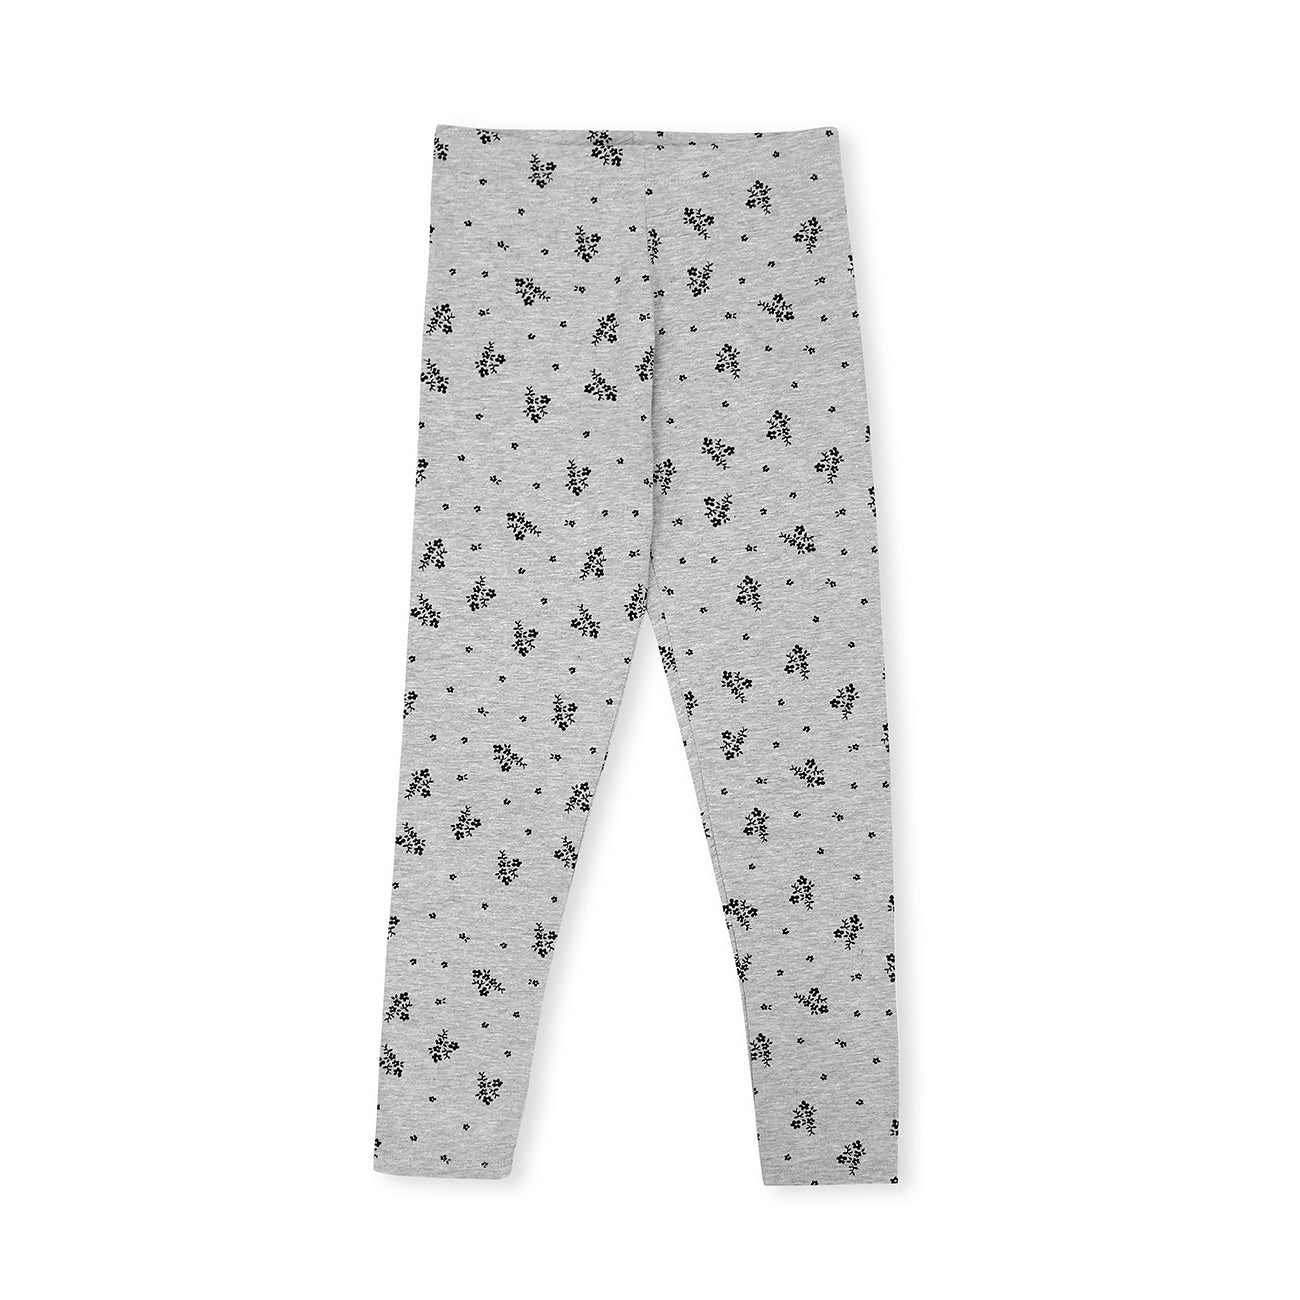 Imported Grey All-Over Printed Soft Cotton Stretch Legging For Girls (11583)